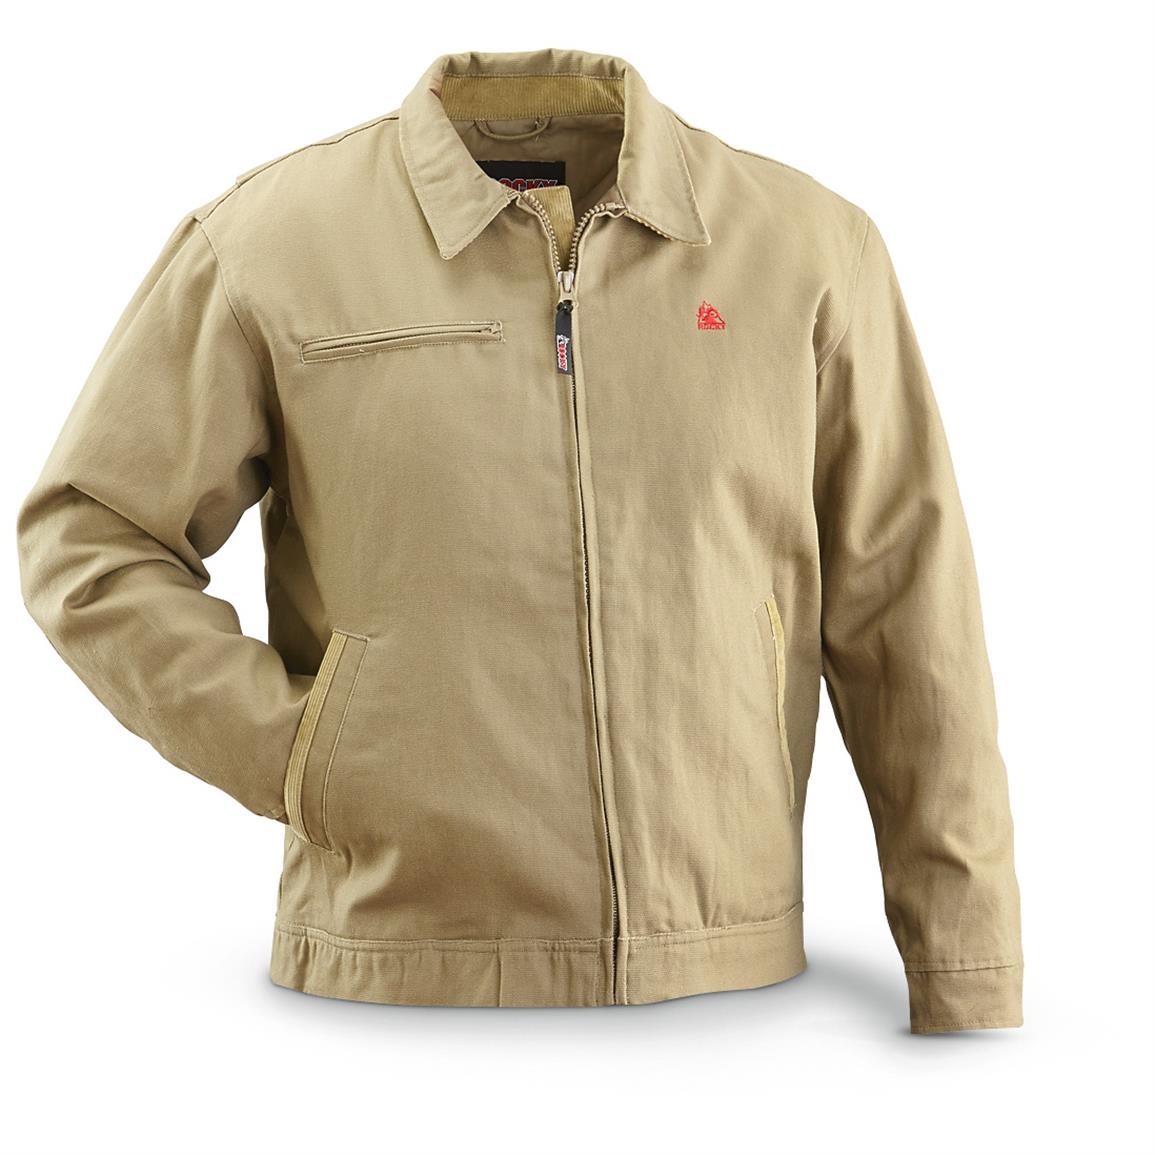 Rocky Core Men's Insulated Canvas Short Jacket - 643354, Uninsulated